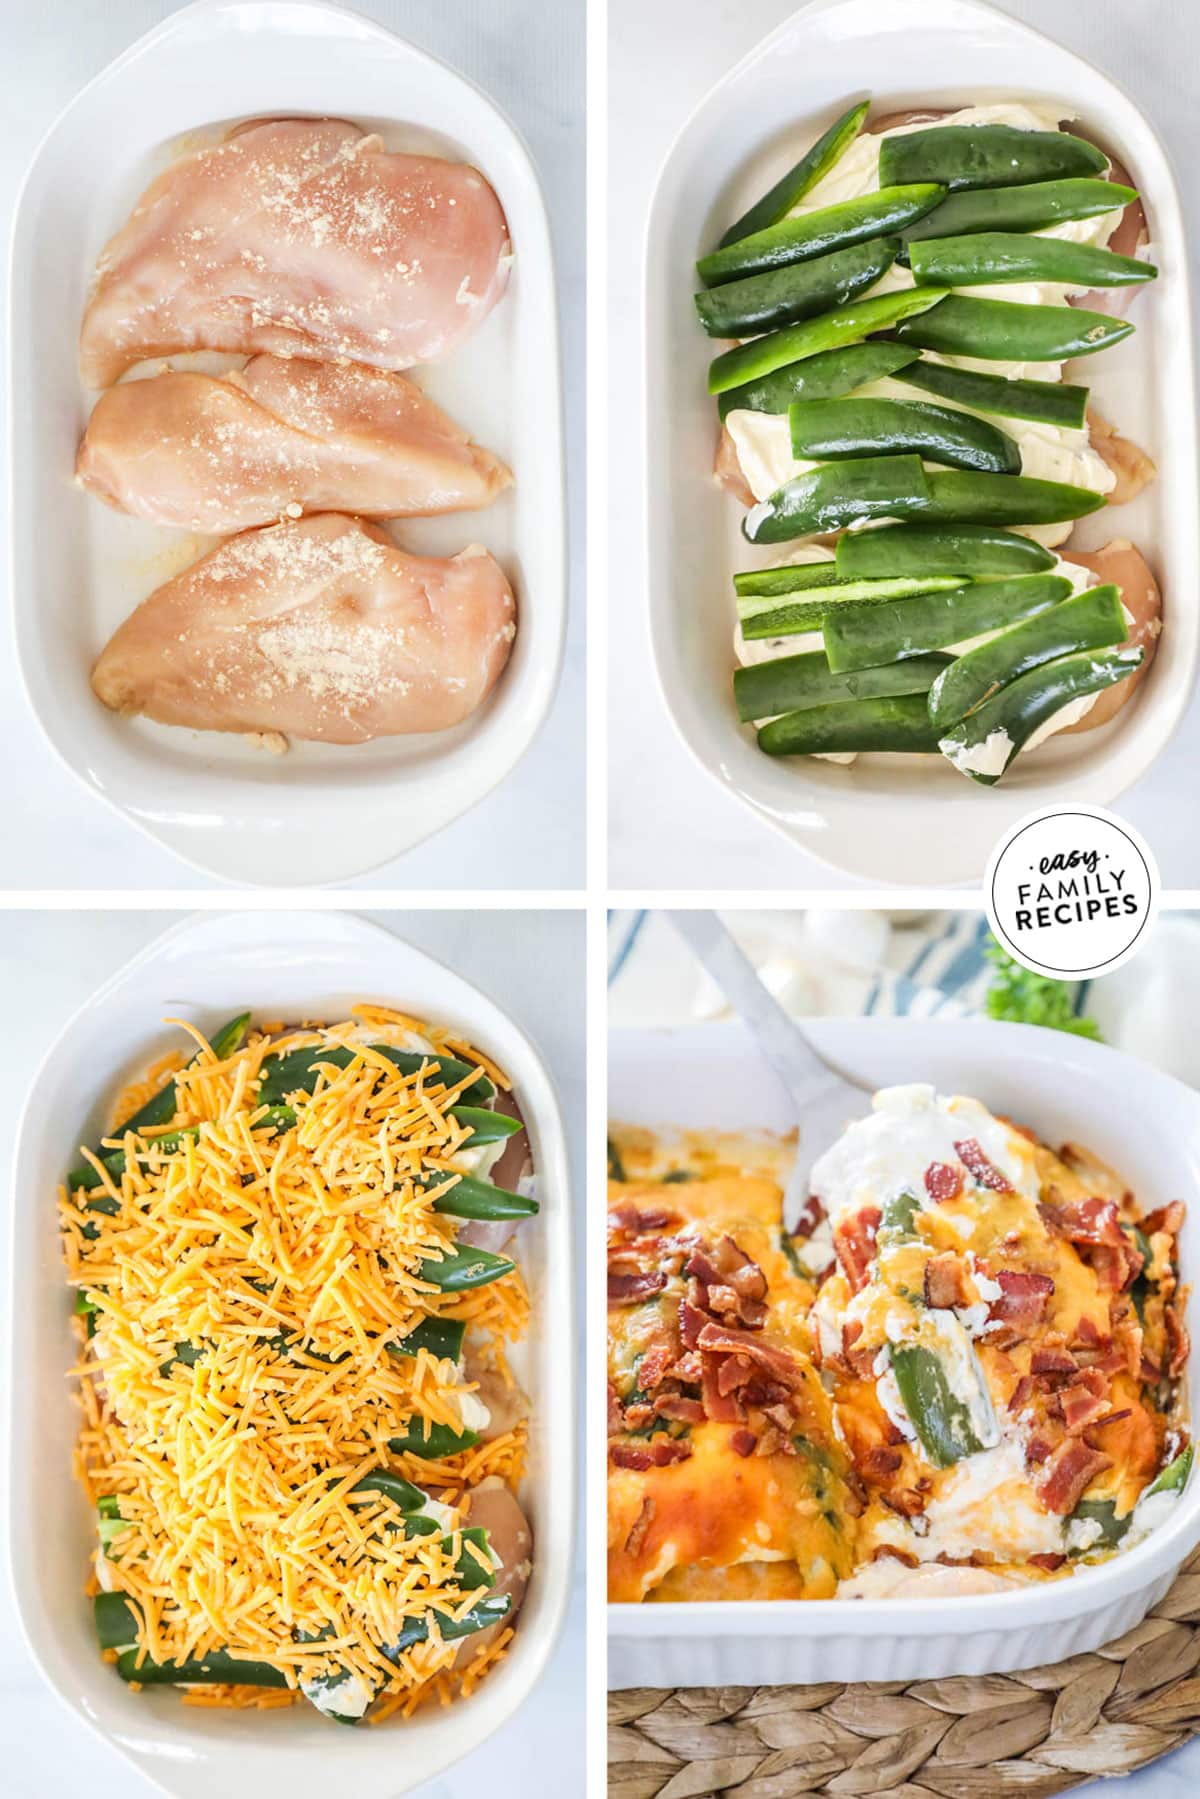 Process photos for how to make jalapeno popper chicken breast- 1 season chicken breast and place in a casserole dish. 2. Layer with cream cheese and jalapeno. 3. top with cheese and bacon. 4. Bake until chicken is cooked through and cheese is melted.